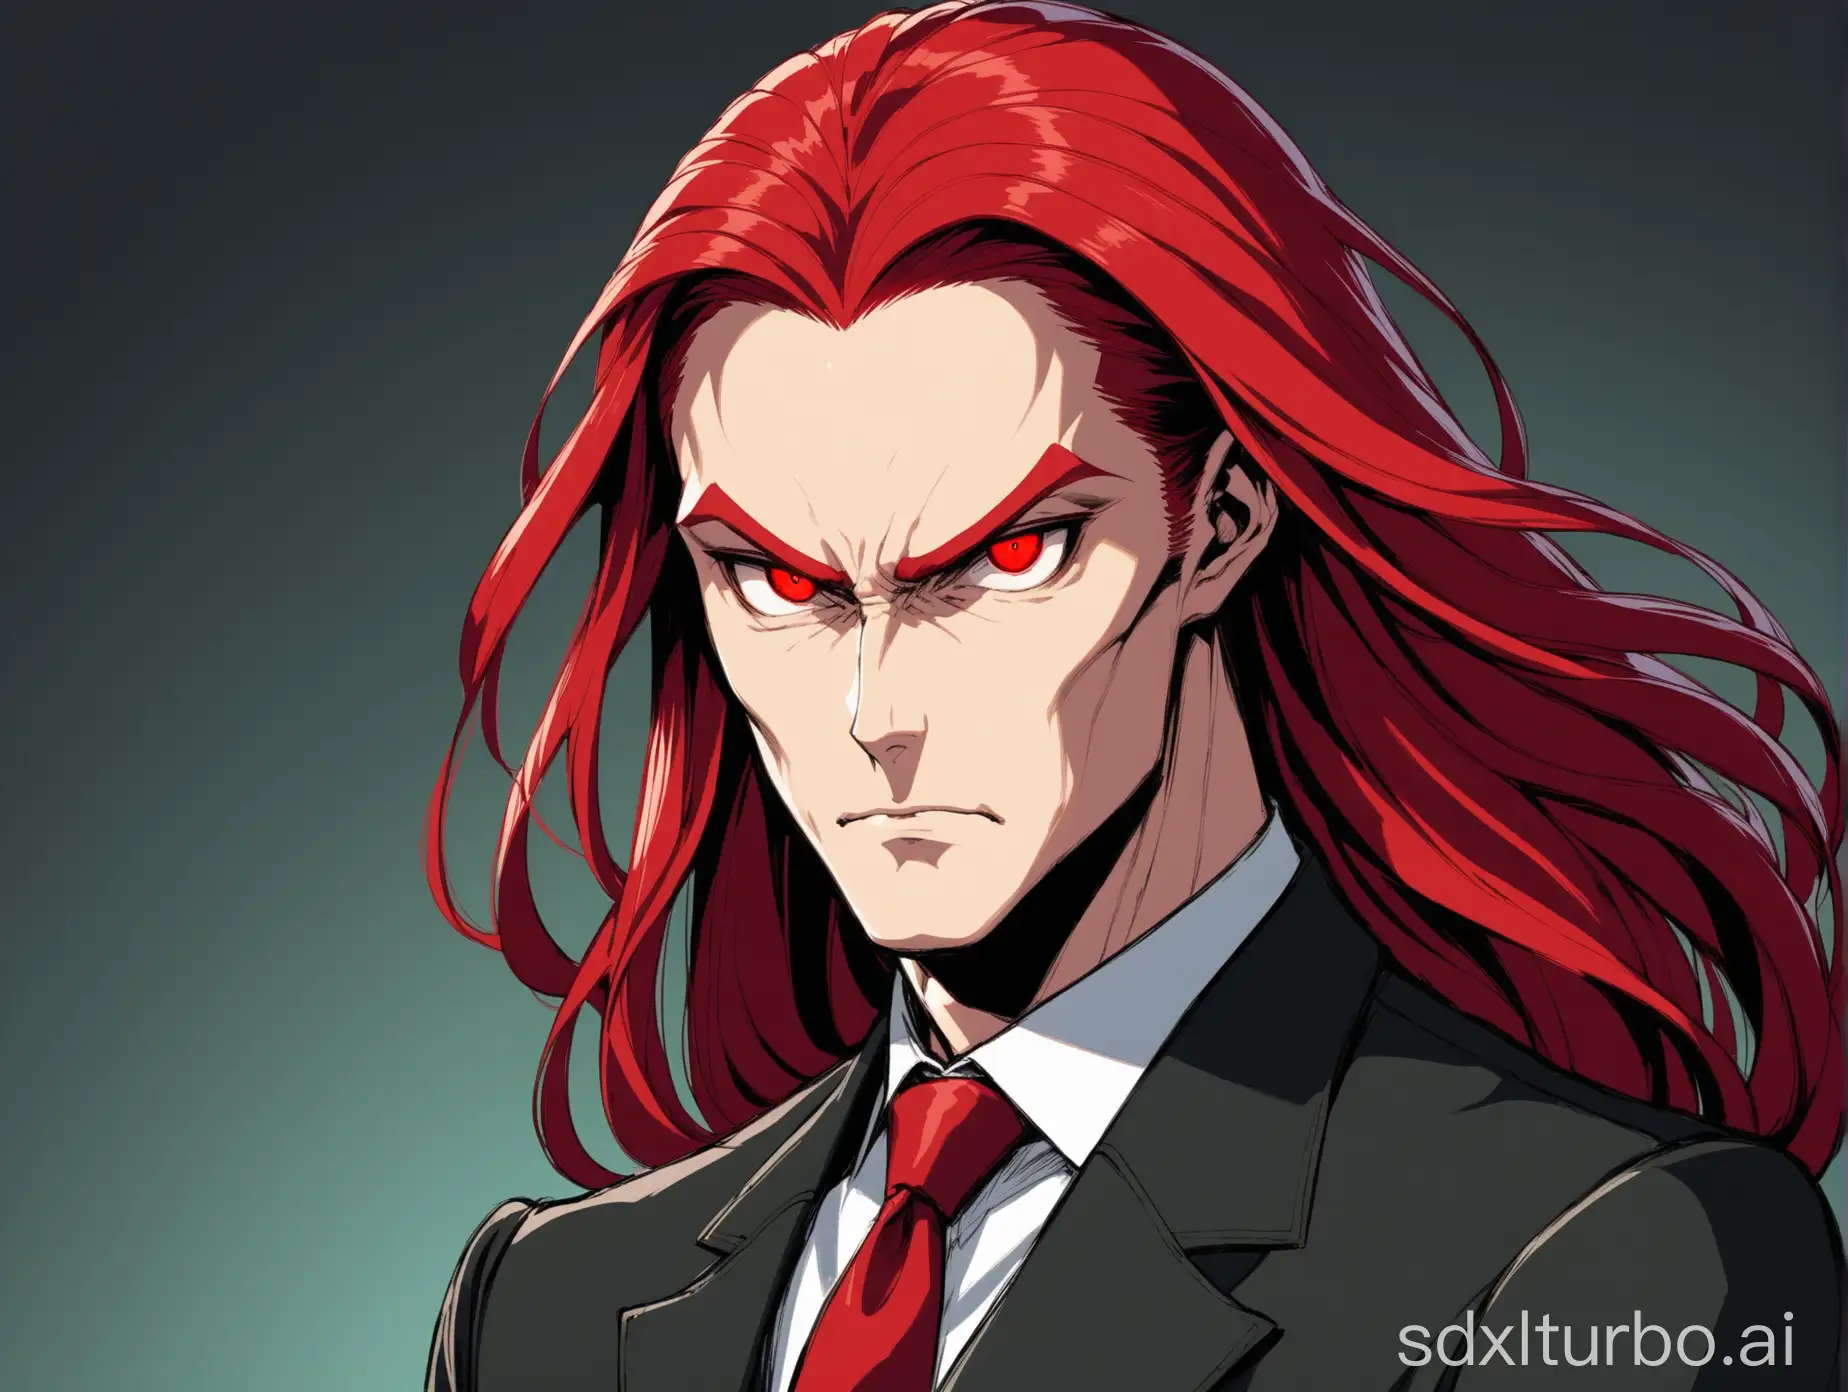 Stern-Villain-in-Black-Suit-Sinister-Man-with-Red-Hair-and-Piercing-Gaze